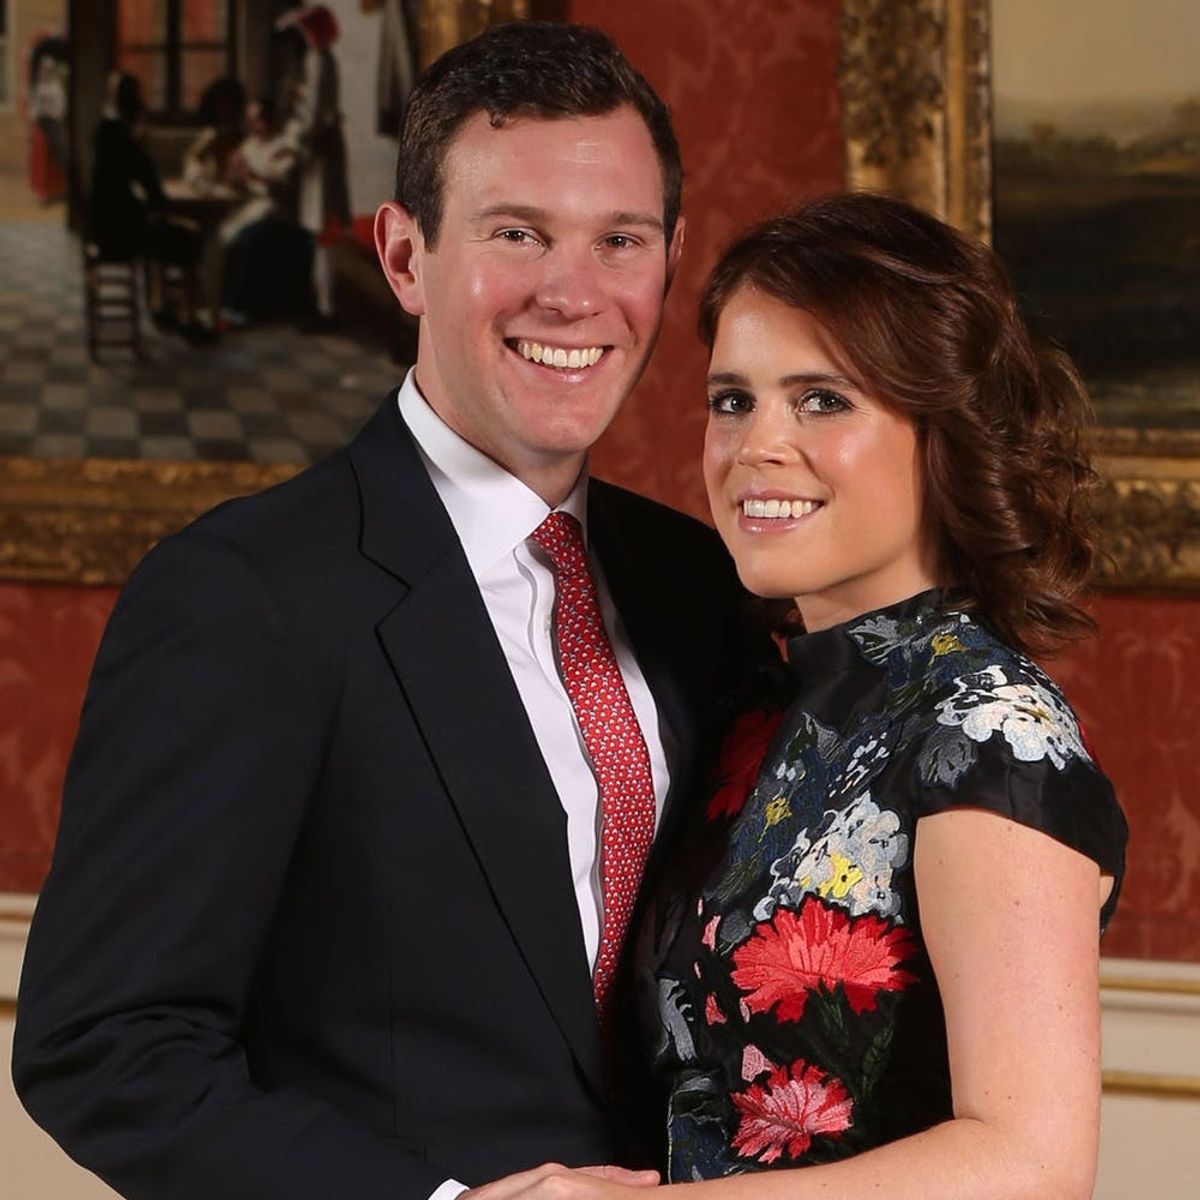 Princess Eugenie and Jack Brooksbank Announce Their Wedding Date